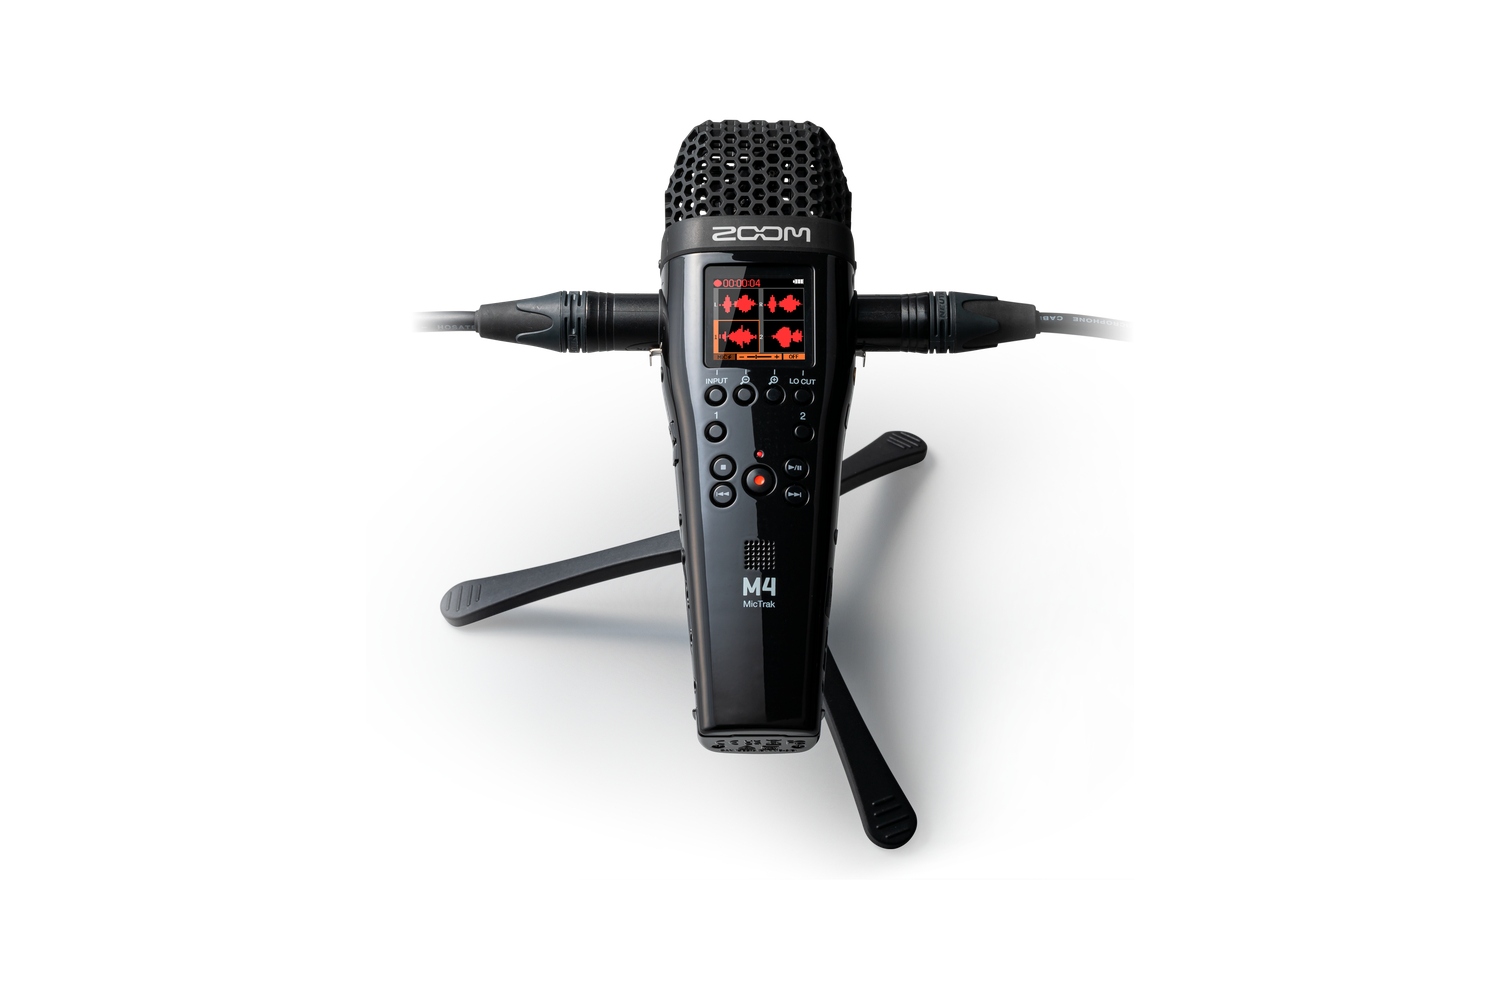 Review: Zoom M4 Mictrak Stereo Microphone and Recorder